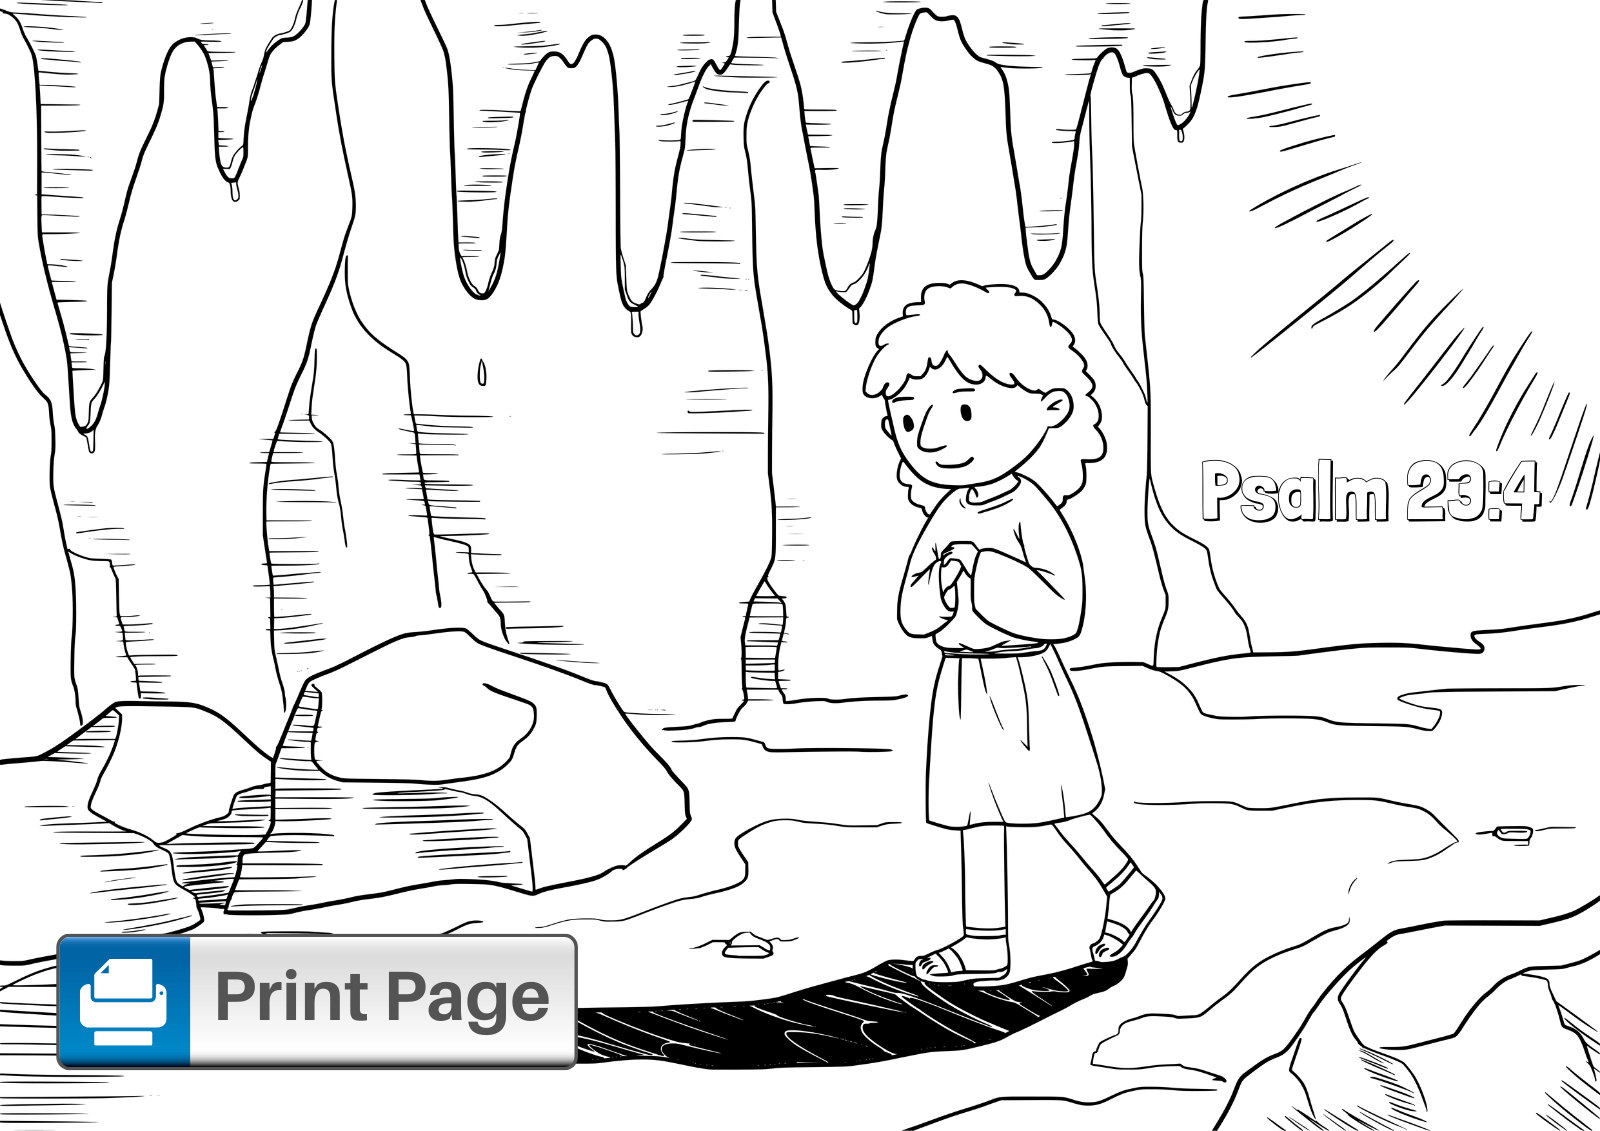 Free printable psalm coloring pages for kids â connectus